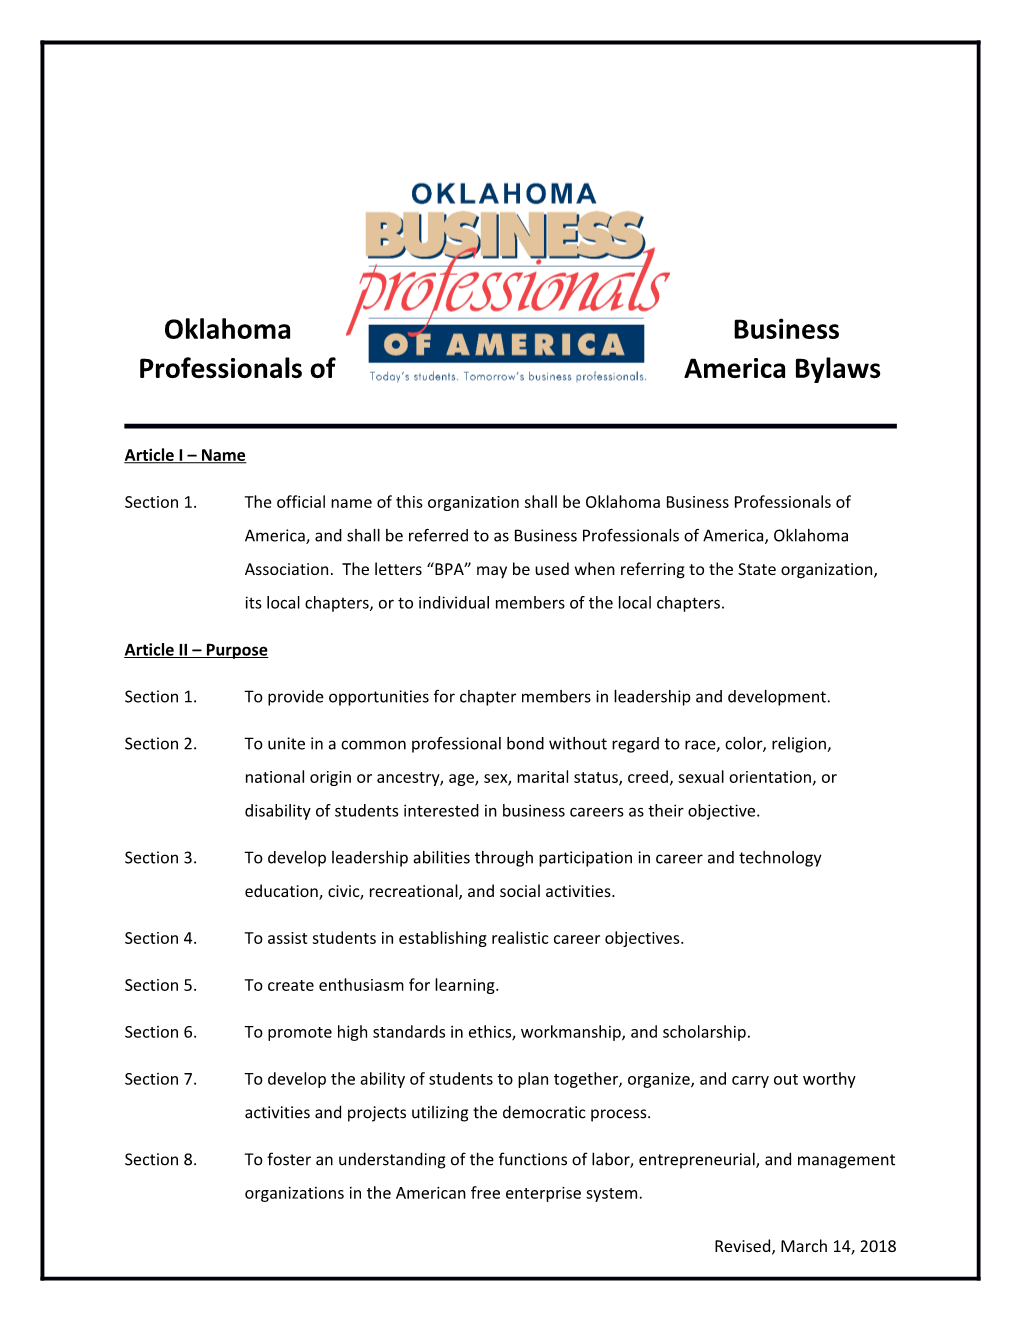 Oklahoma Business Professionals of America Bylaws